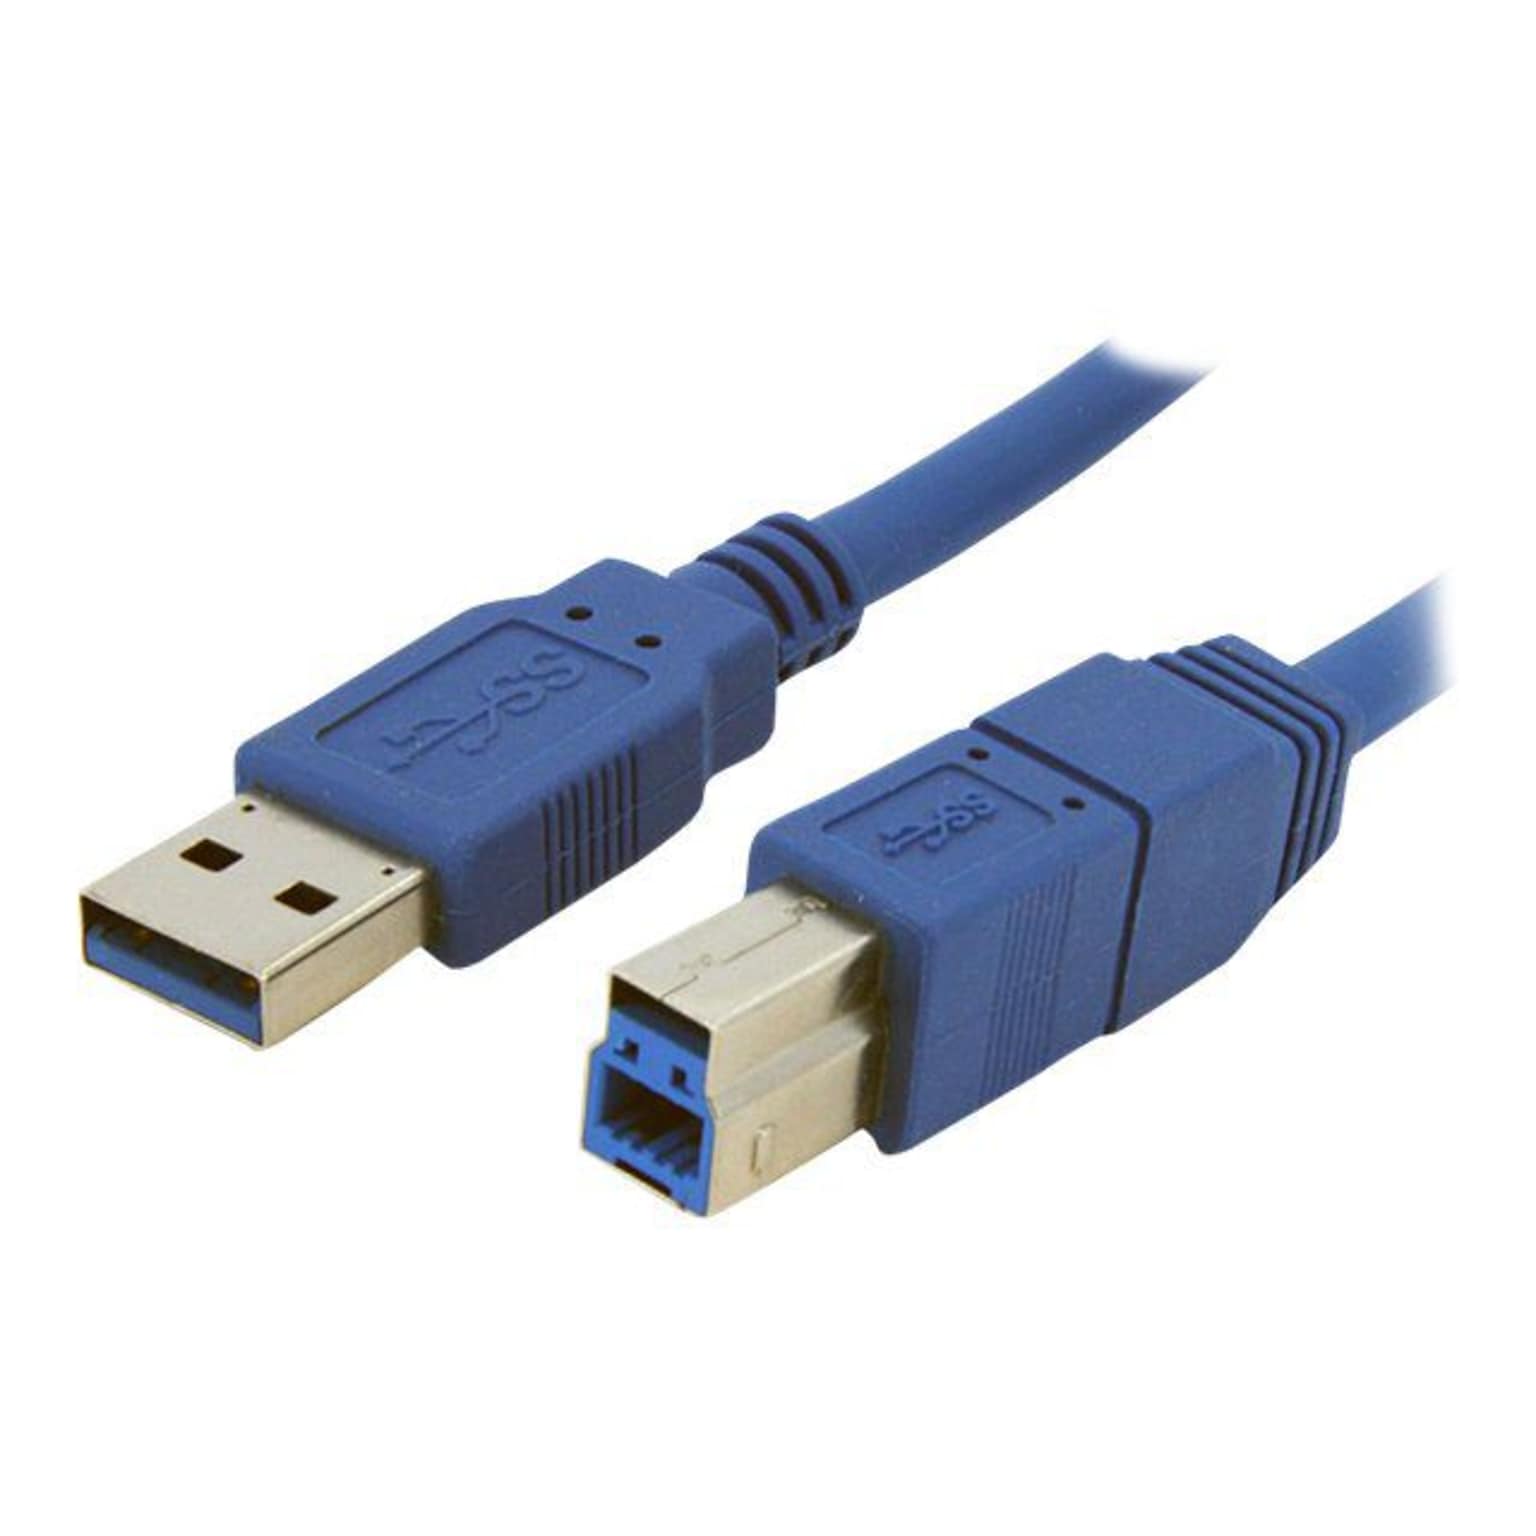 StarTech® 6 Superspeed USB 3.0 Type A Male To Type B Male Cable; Blue